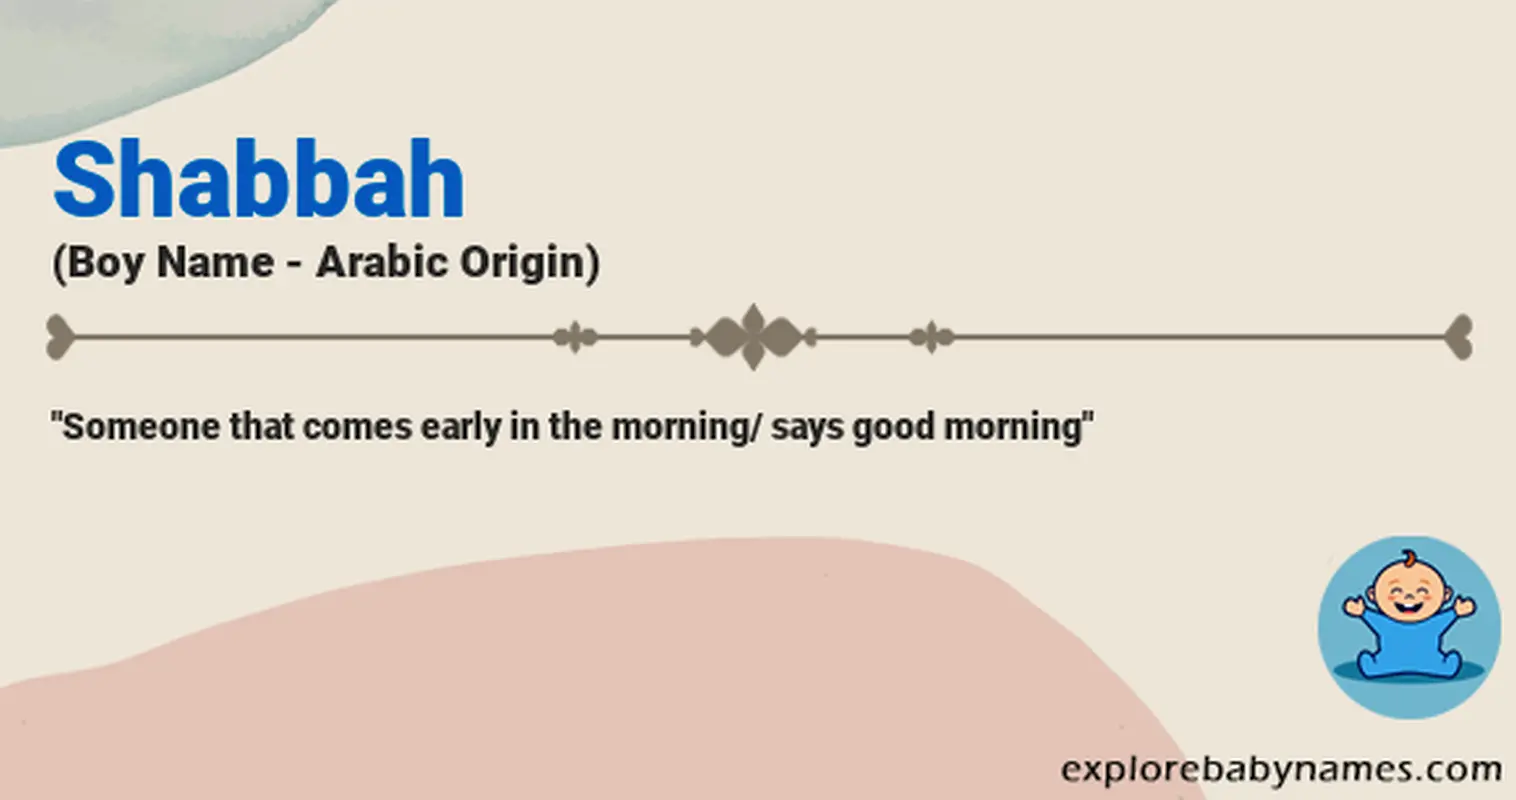 Meaning of Shabbah